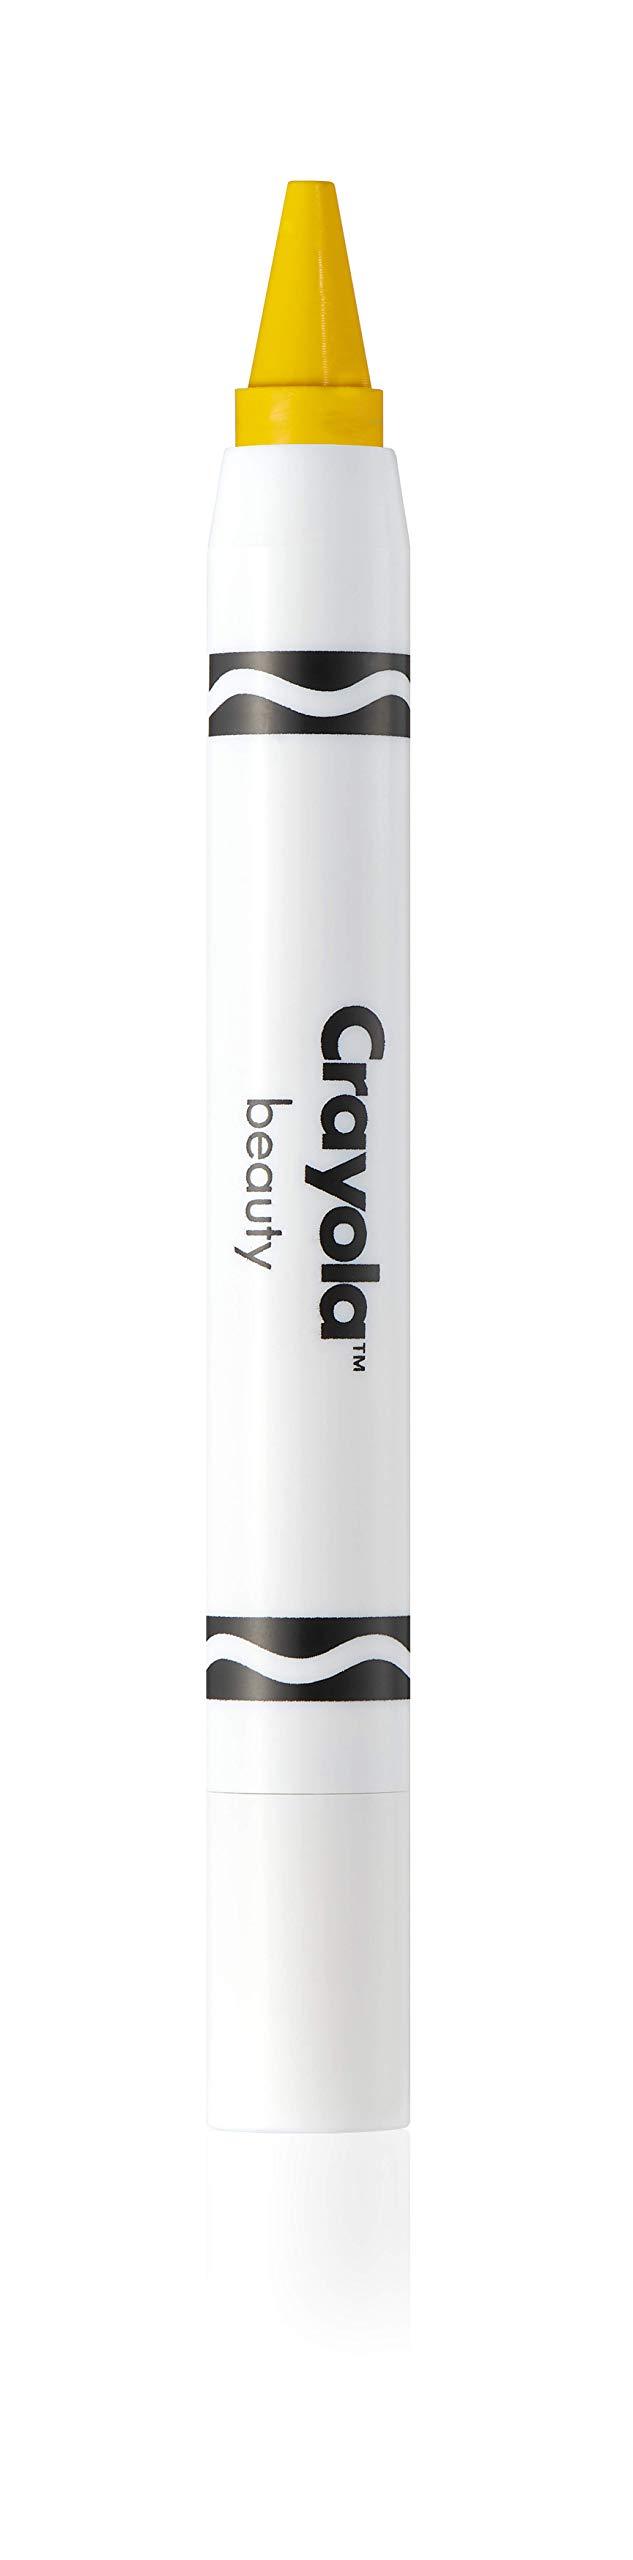 Crayola Beauty - Face Crayon - 3 in 1, Use as Eyeshadow, Lipstick or Blush - Highly Pigmented Color, Ultra Creamy, No Mess - Talc Free & Vegan Friendly - Dandelion - 0.07 oz - BeesActive Australia